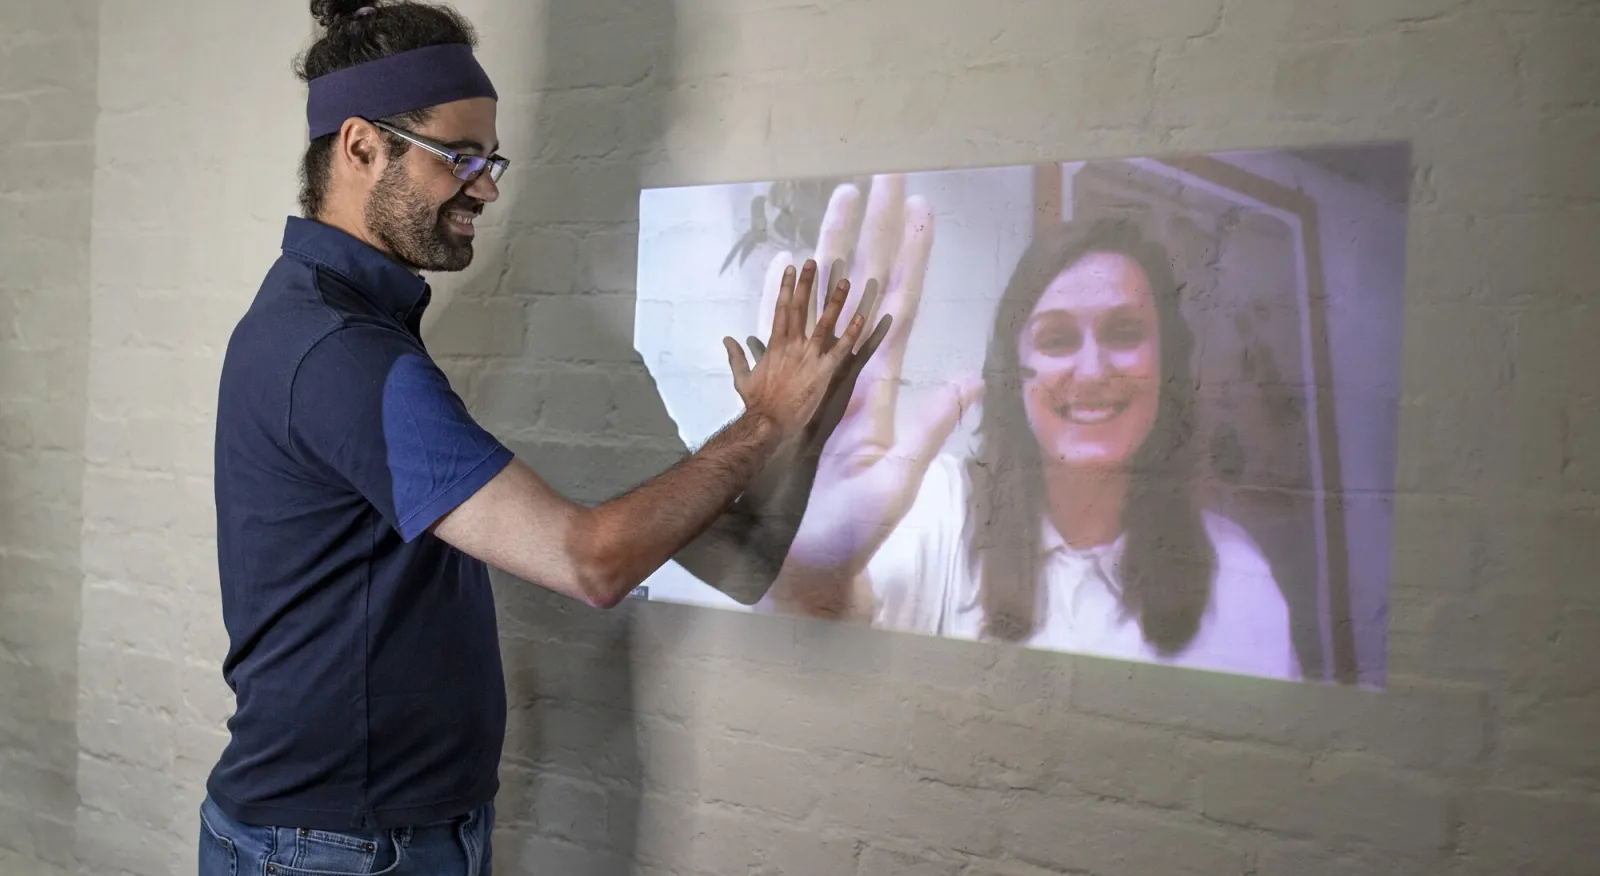 A man putting his hand on a screen display of a woman putting her hand in the same place.